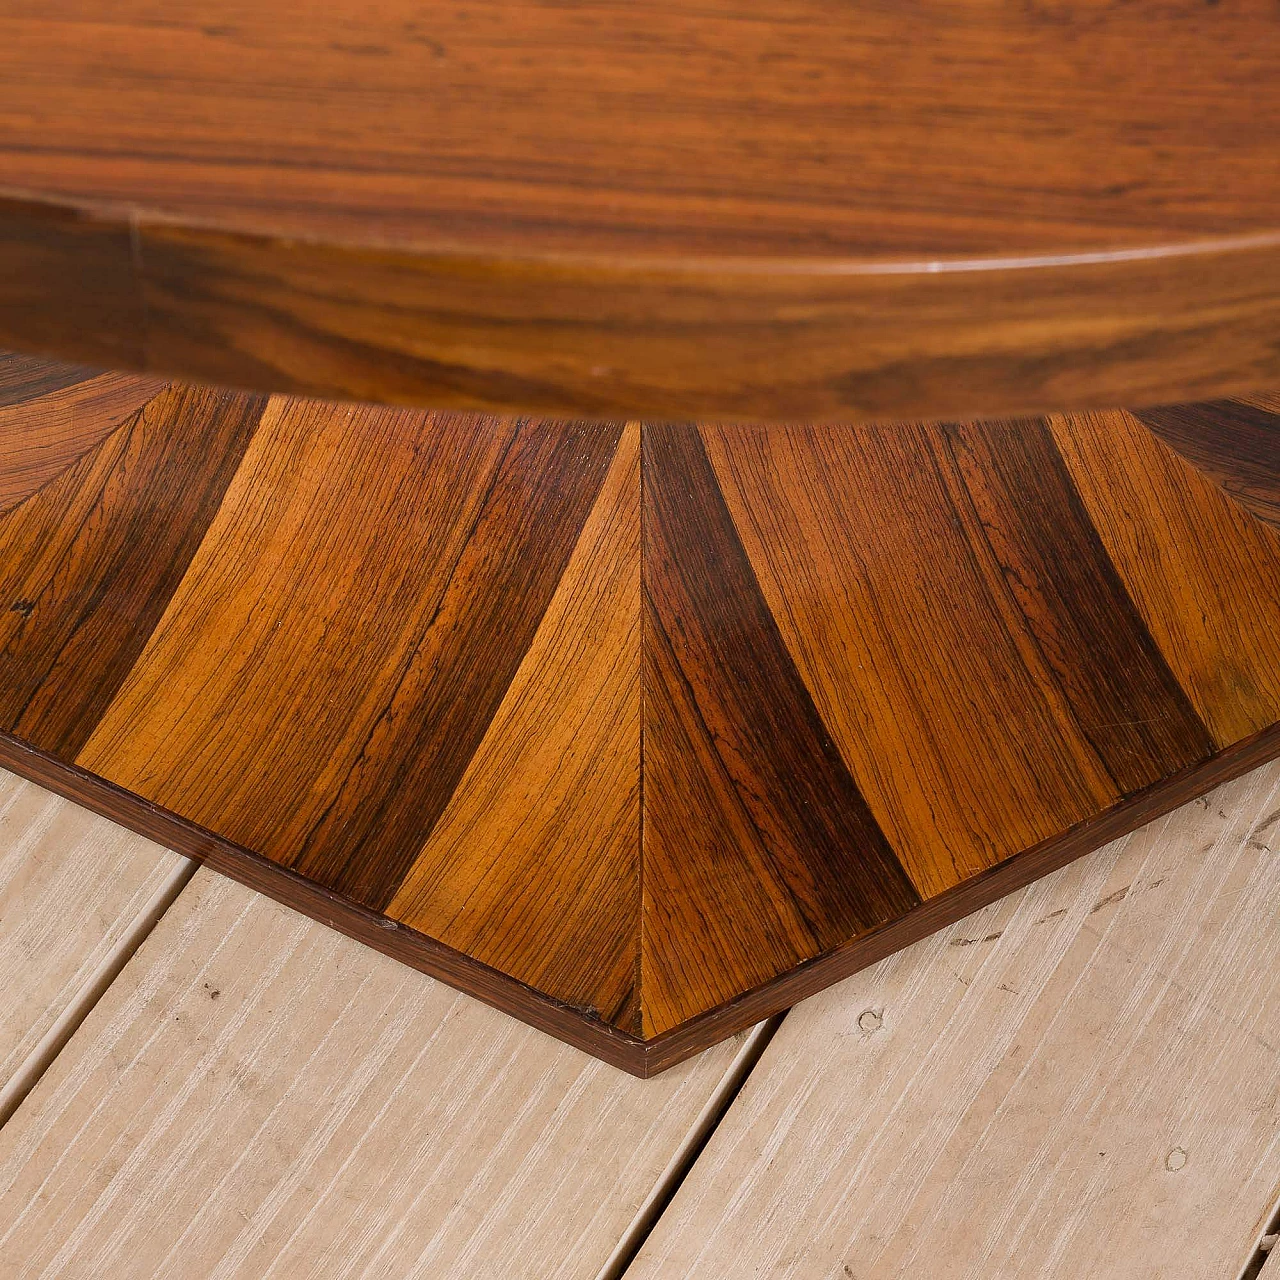 Clessidra round rosewood table by Carlo De Carli, 1960s 1365021